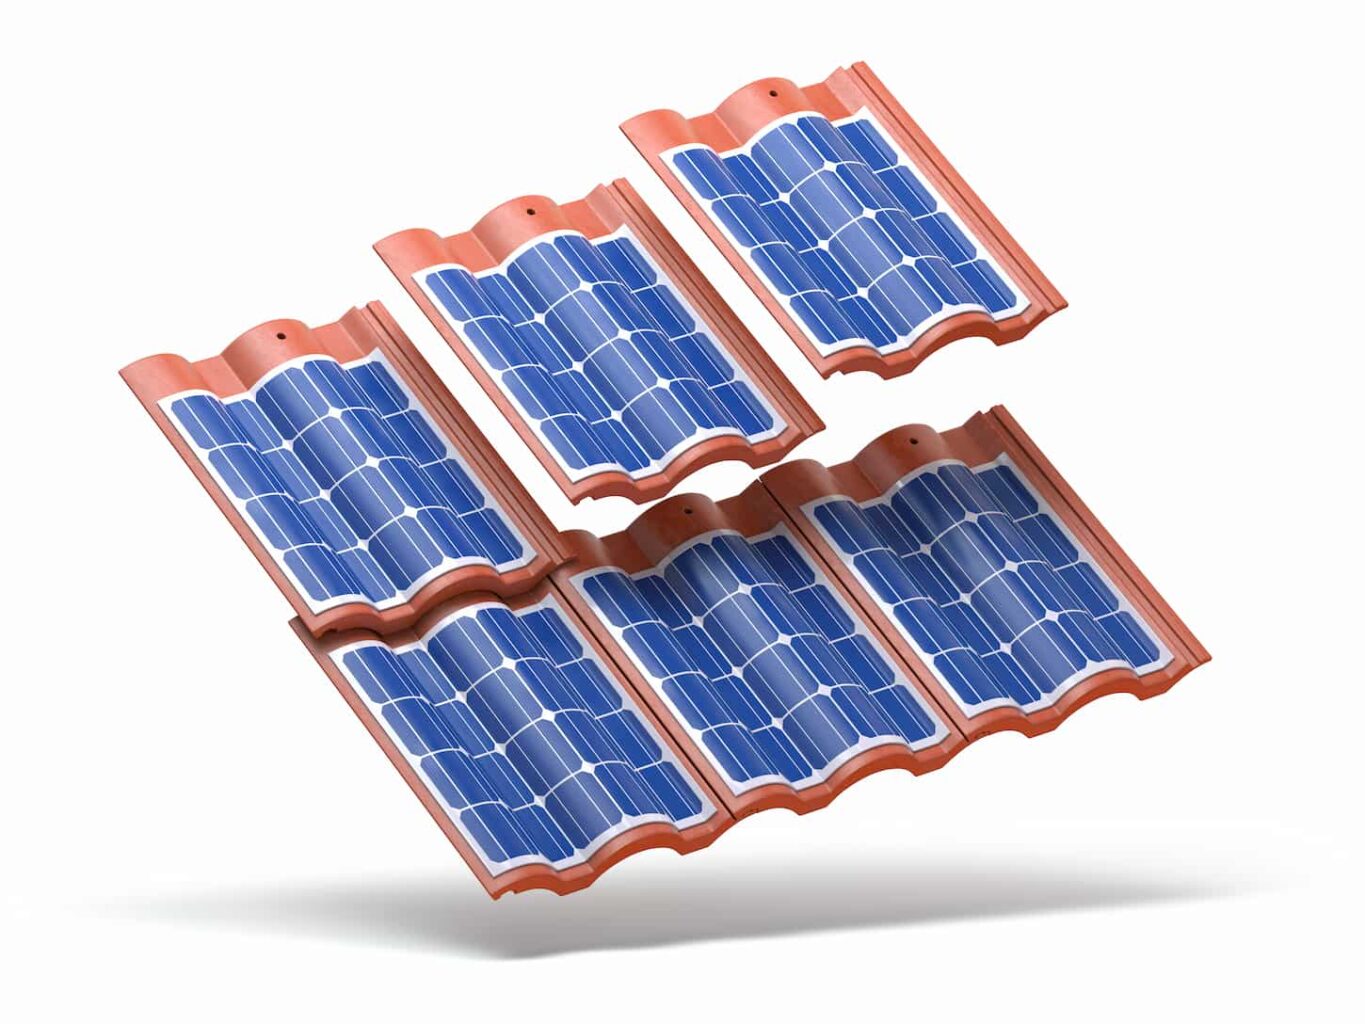 An image of Solar panels integrated into roof tiles or shingles isolated on white background.